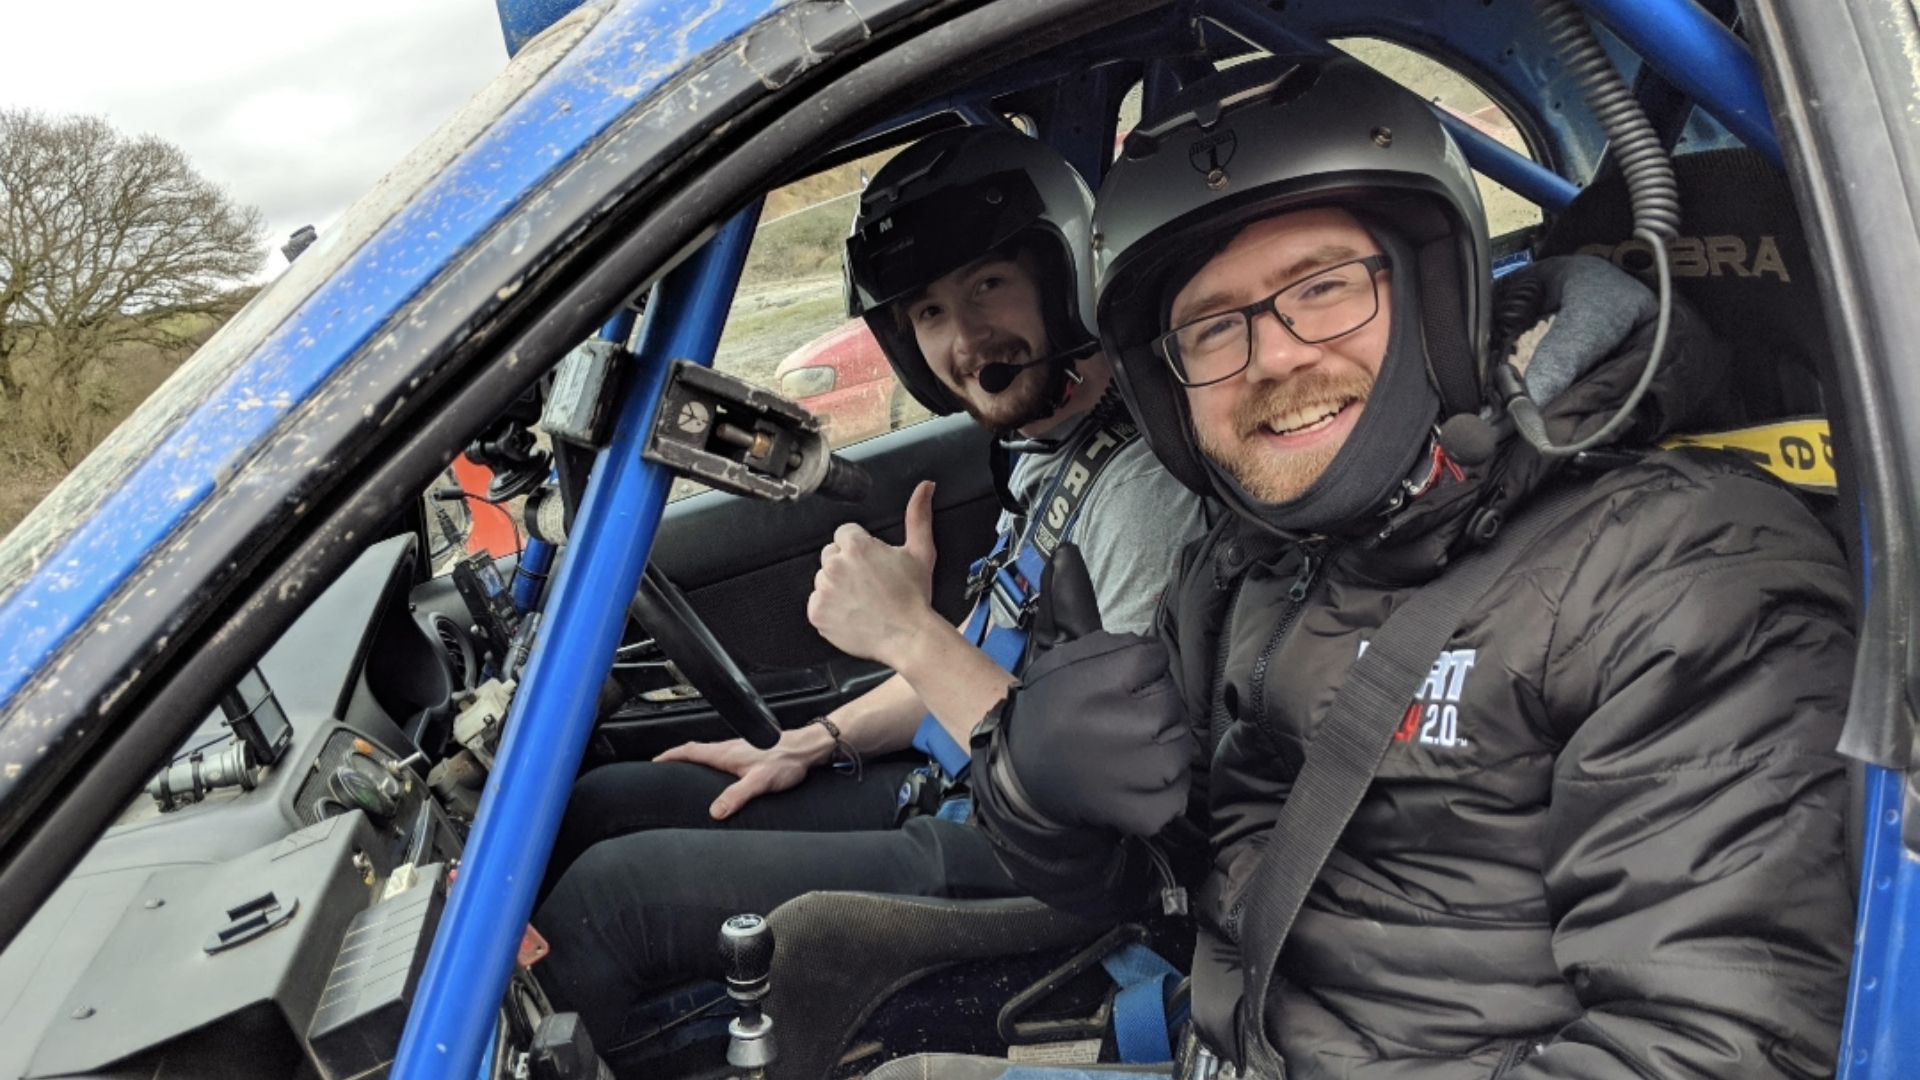 Ross Gowing Samples a Real Rally Car with Jon Armstrong